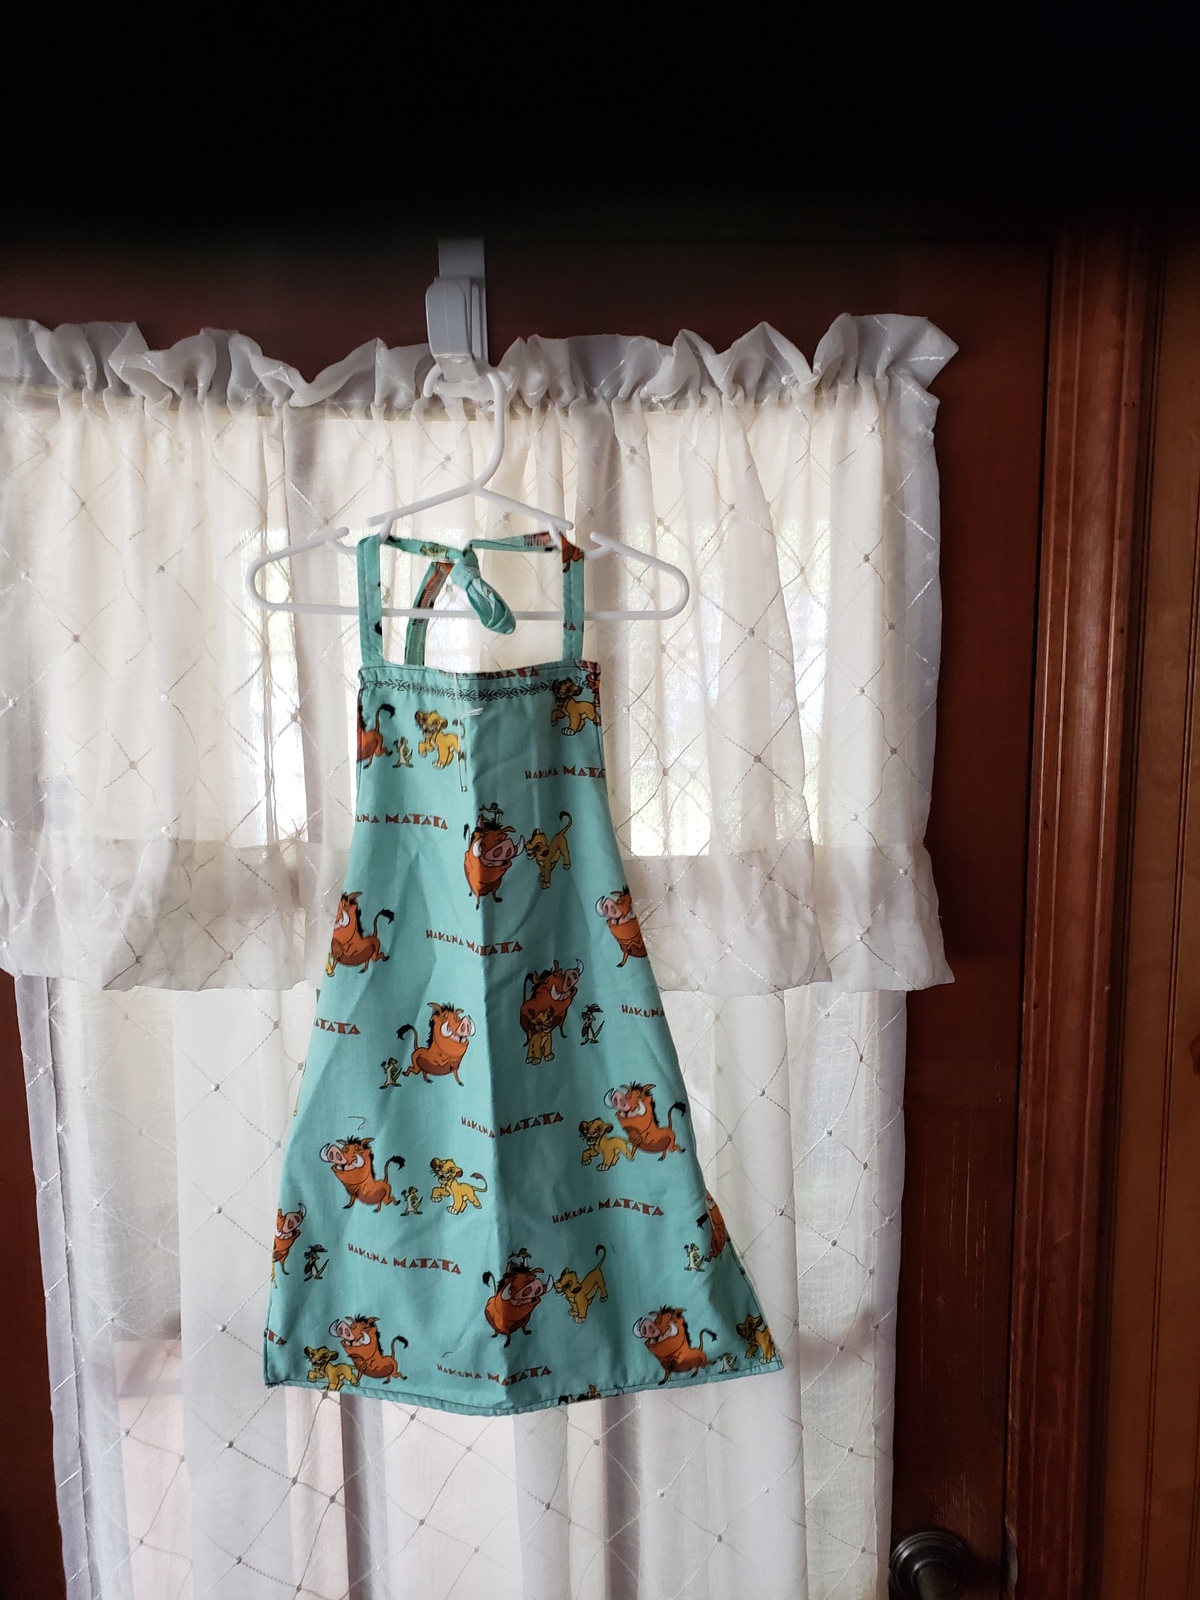 Lion King Child's Cotton Apron Lined - Child Small (2T - 4T)  - $12.99